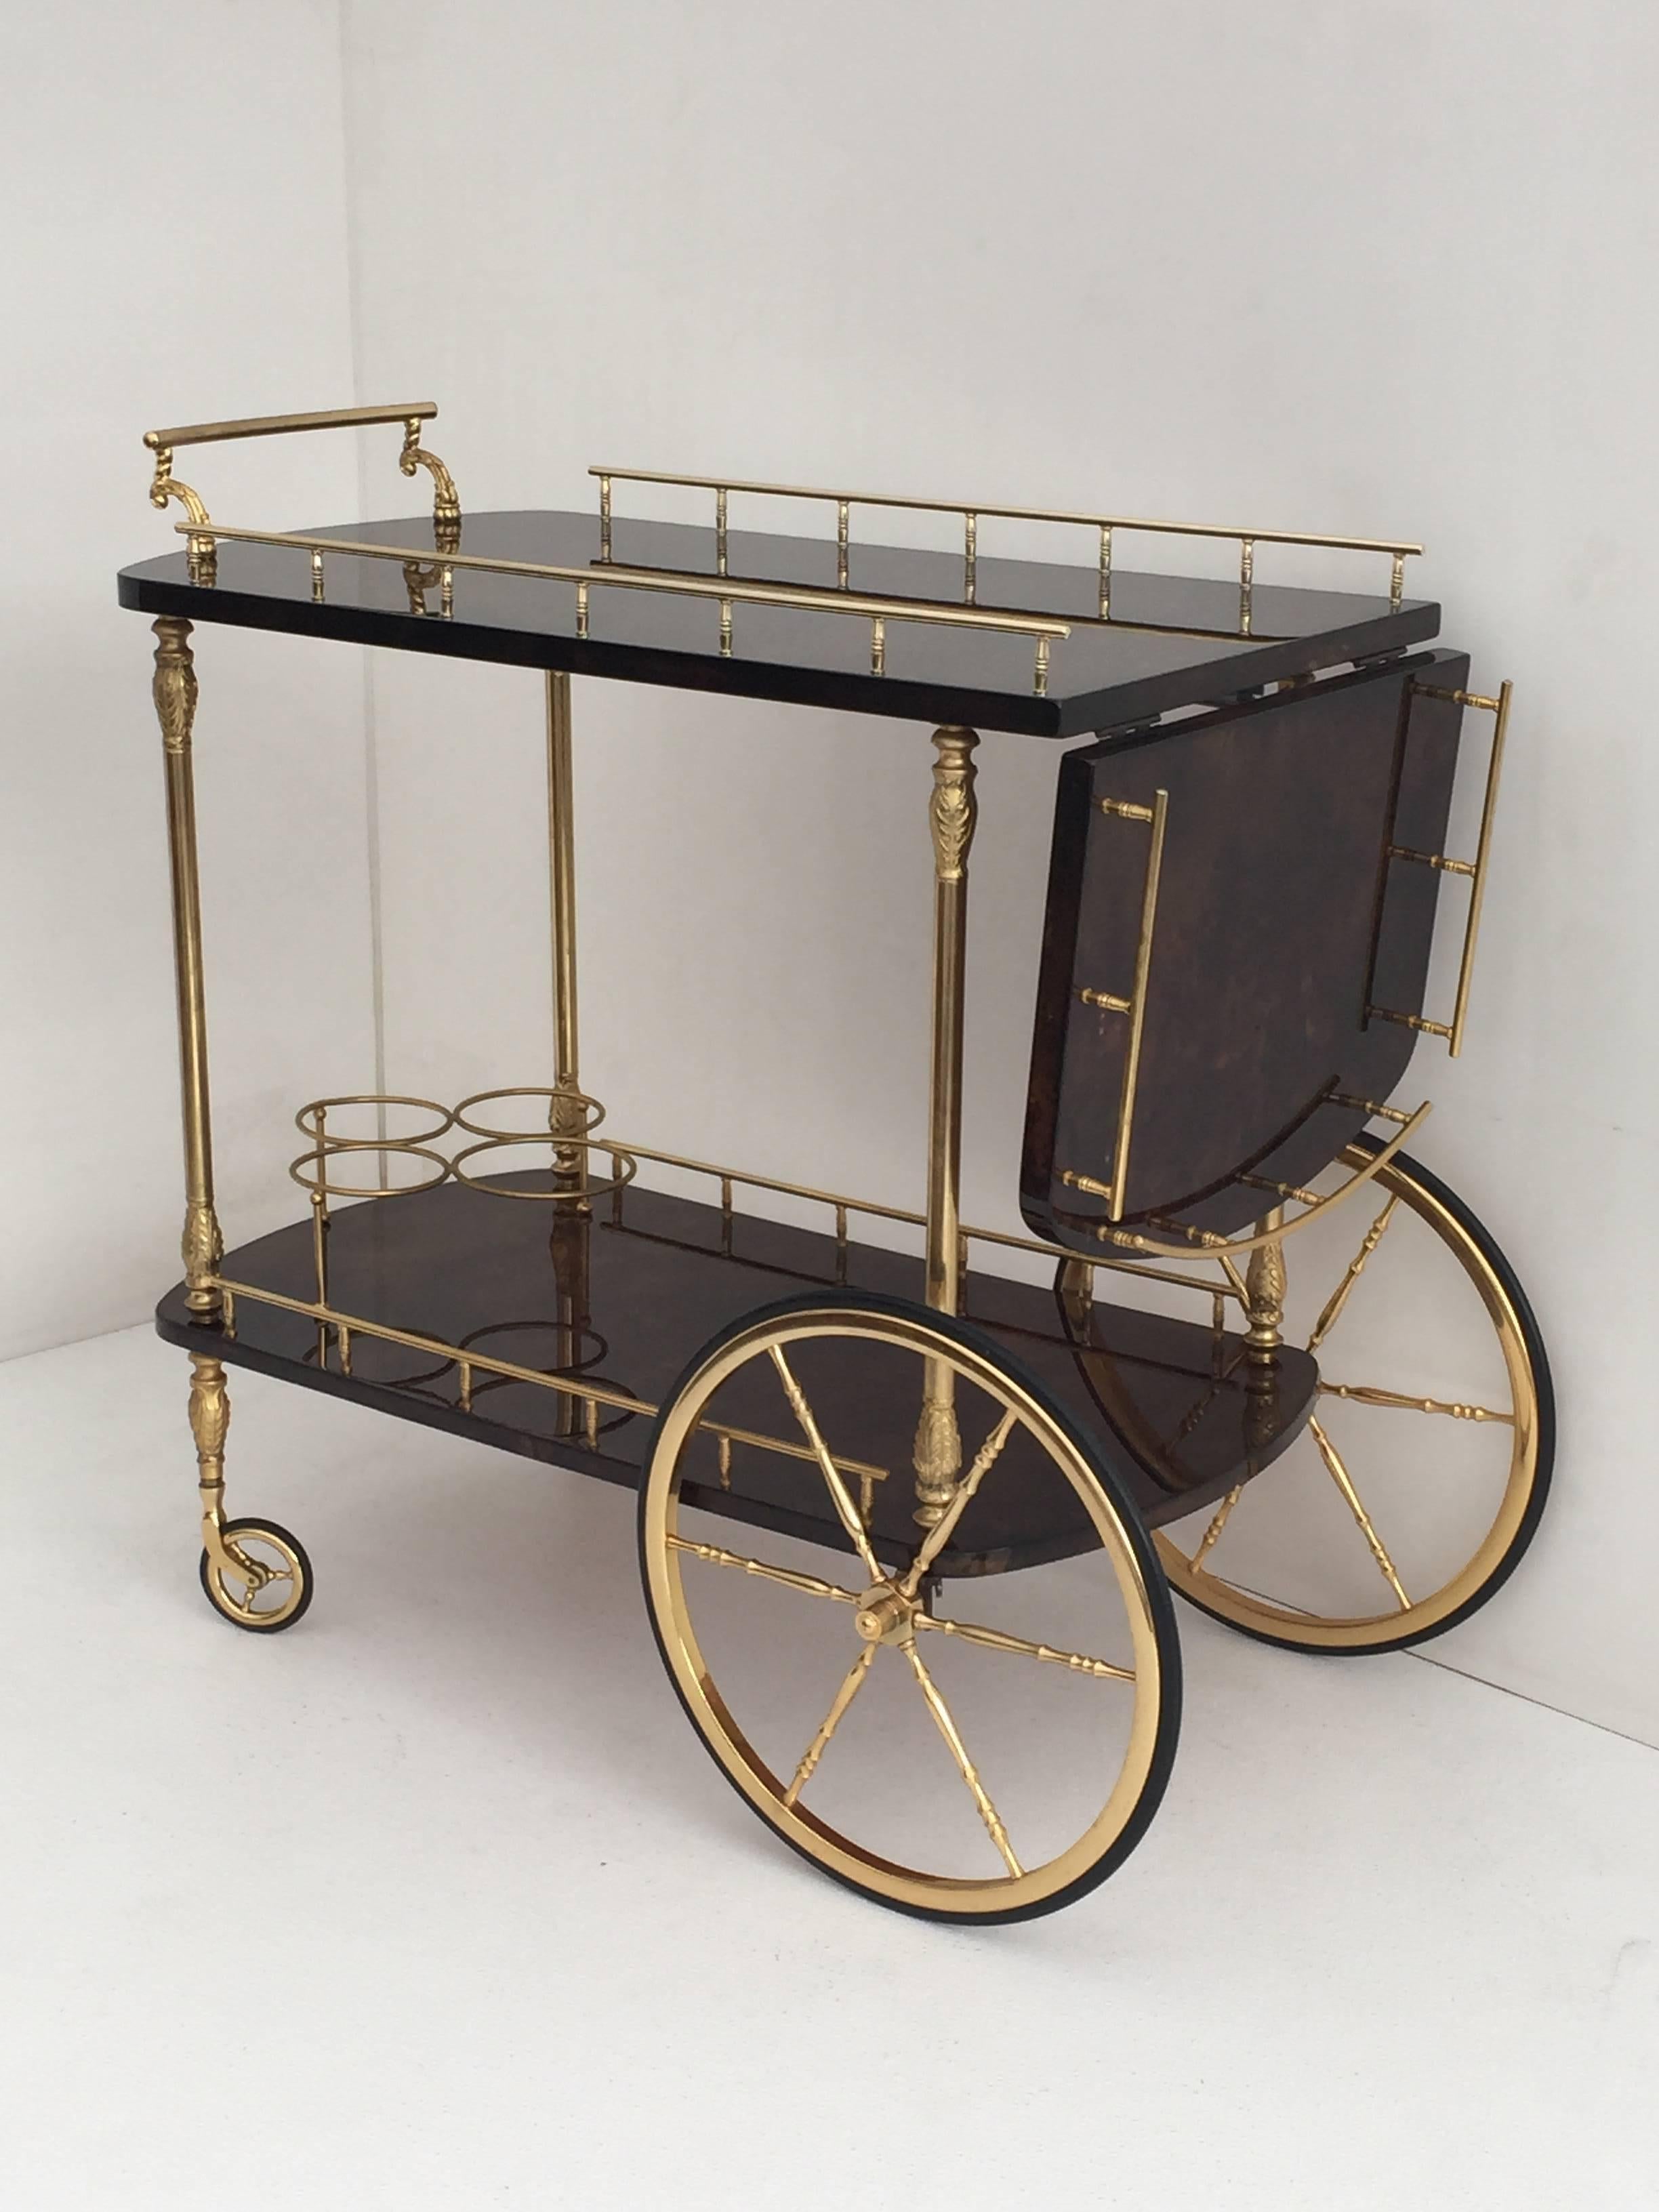 Dark brown parchment Aldo Tura bar cart top in open position is 44" by 17".